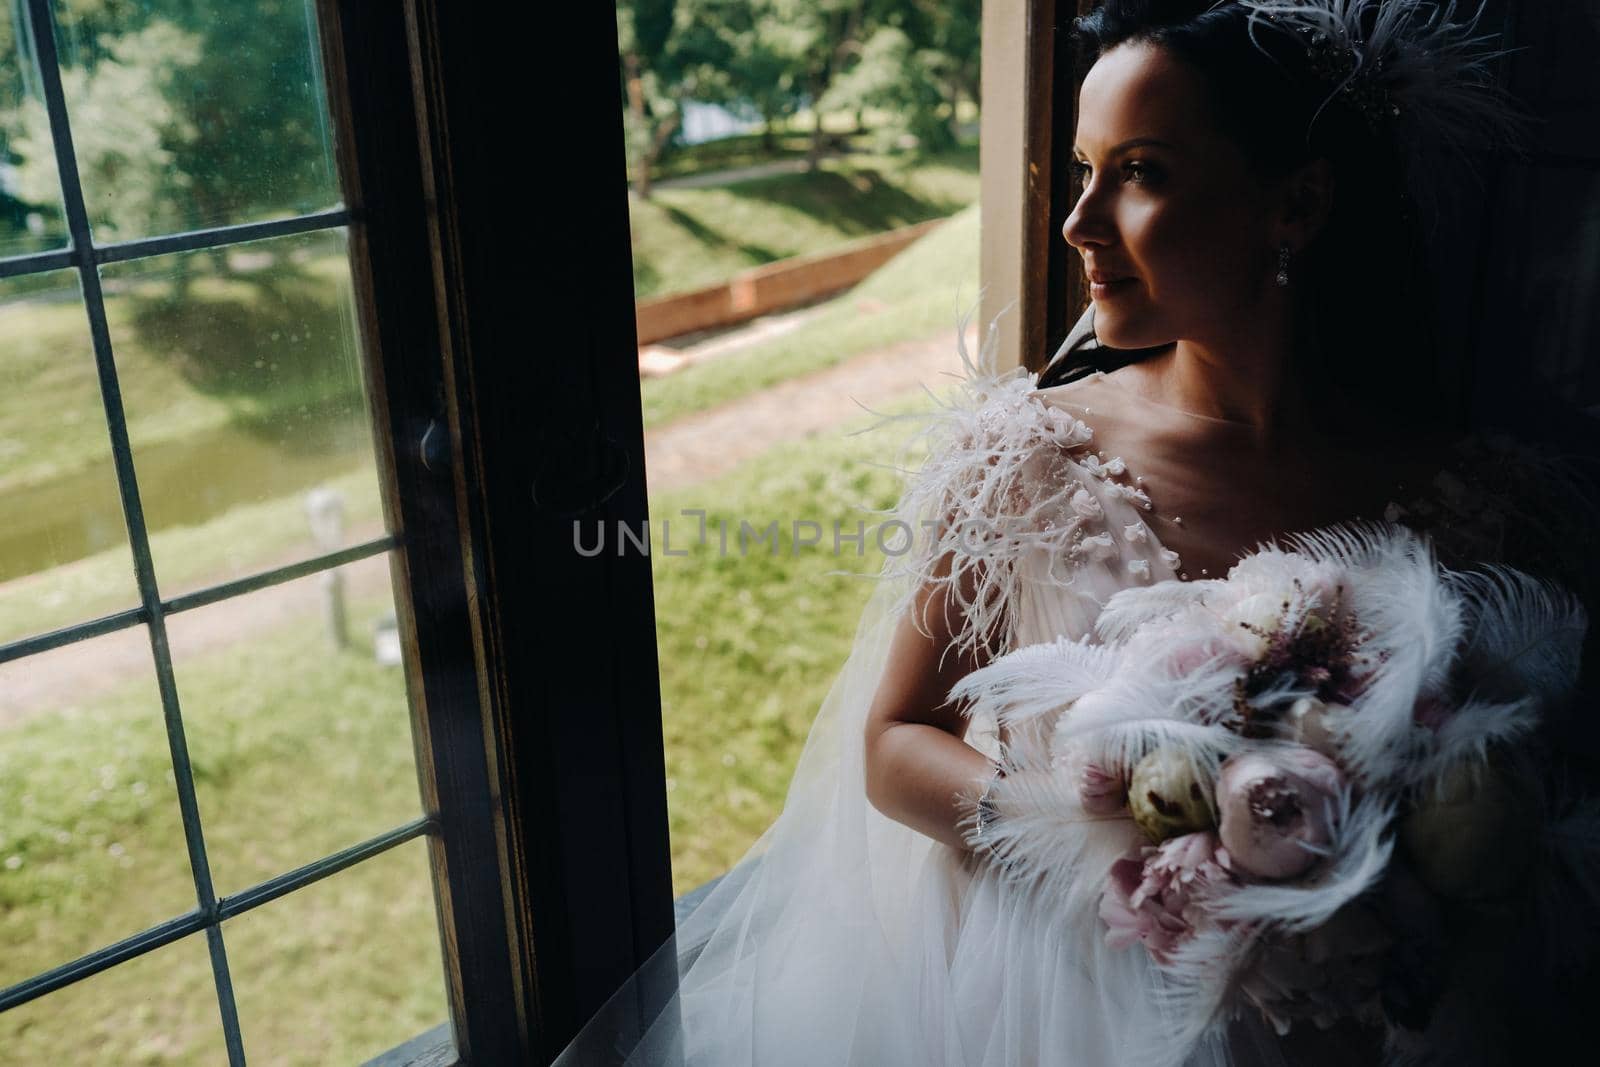 A bride in a wedding dress and a bouquet sits at an open old window and looks.